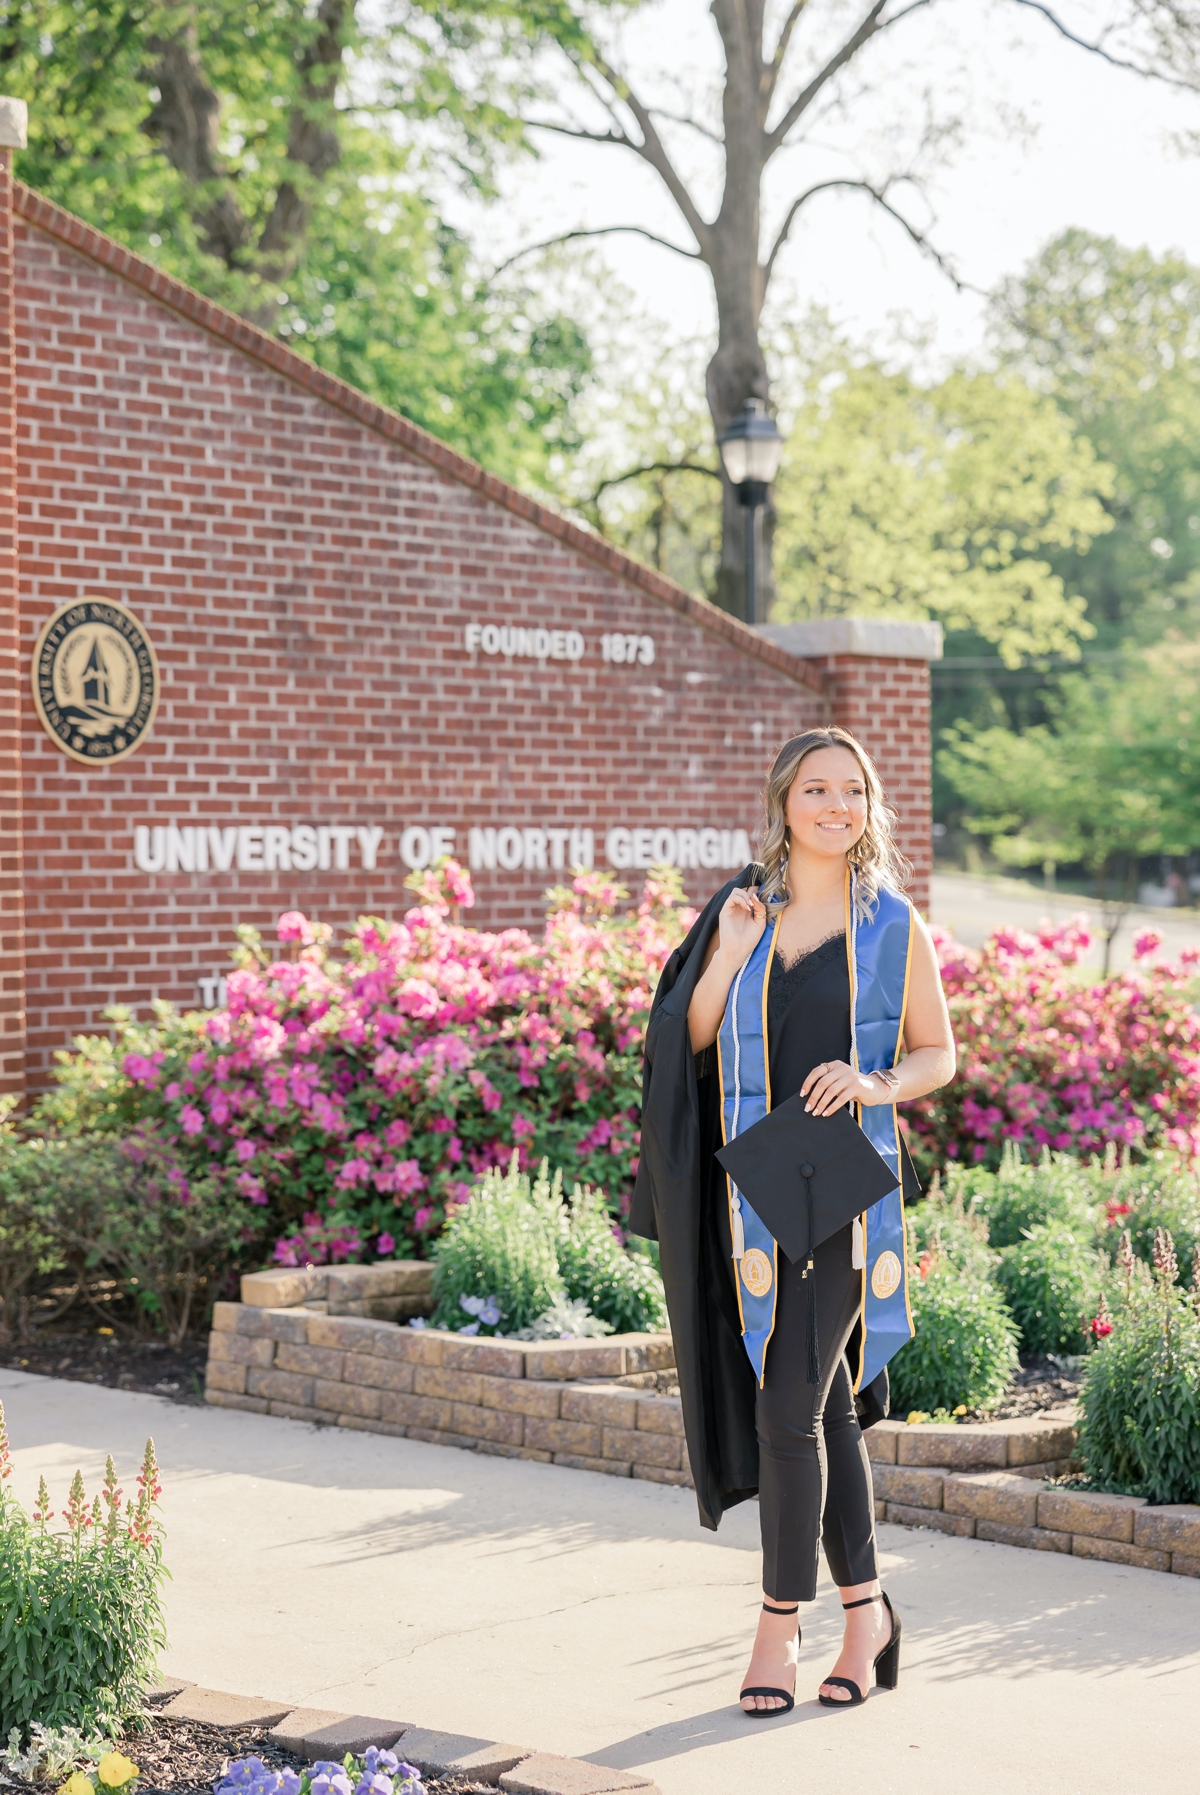 University of North Georgia graduate holding her cap and gown in front of the brick entrance to campus.